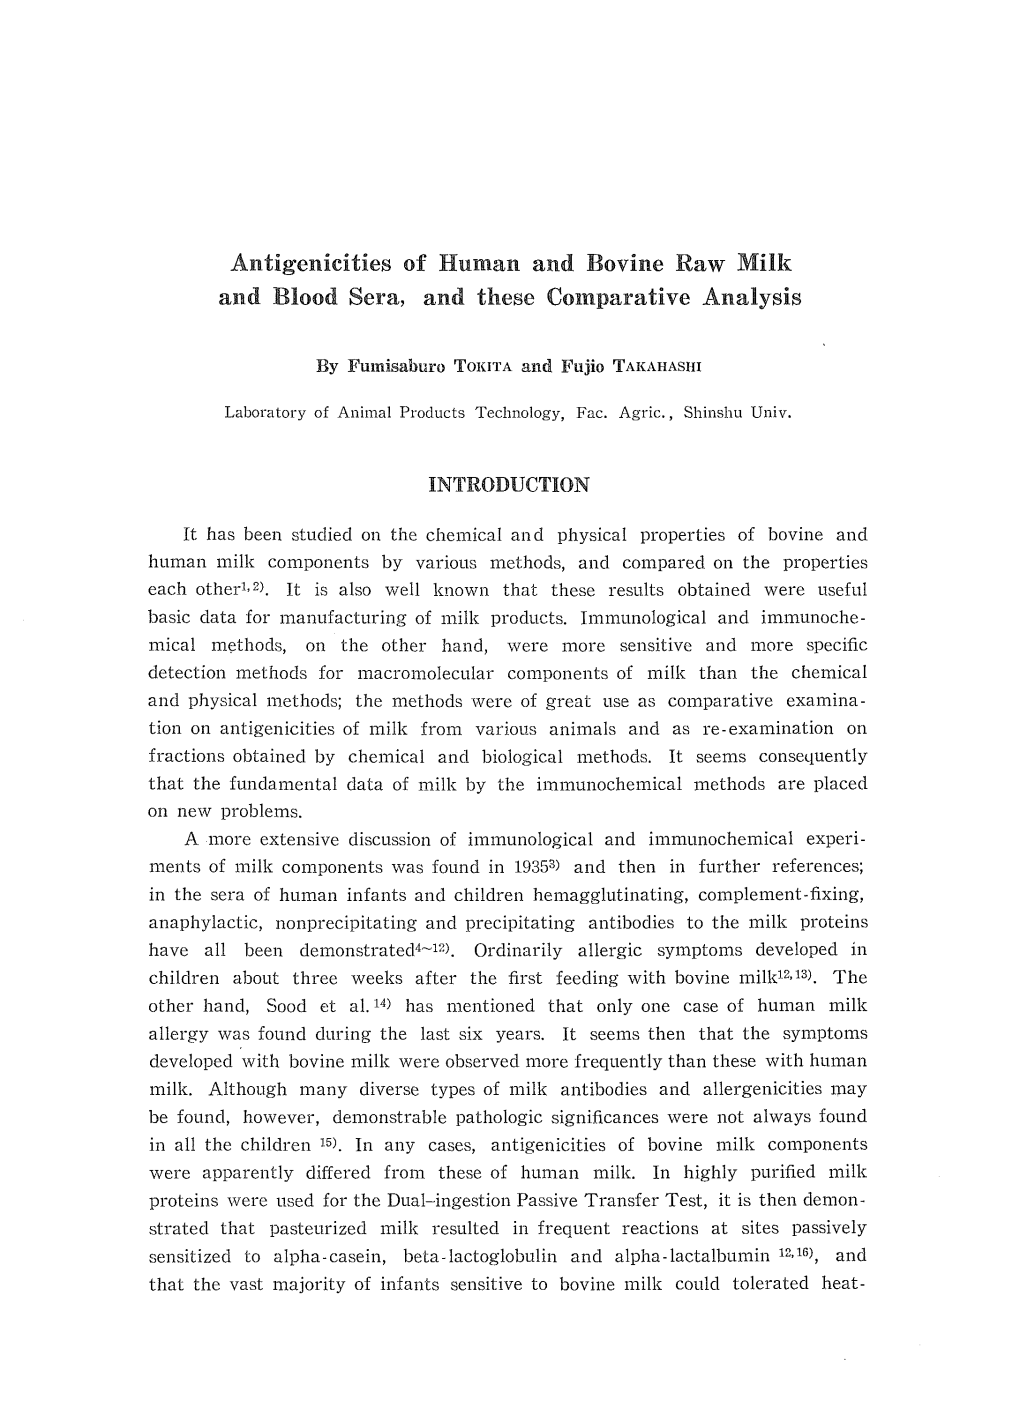 Antigenicities of Human and Bovine Raw Milk and Blood Sera, and These Comparative Analysis